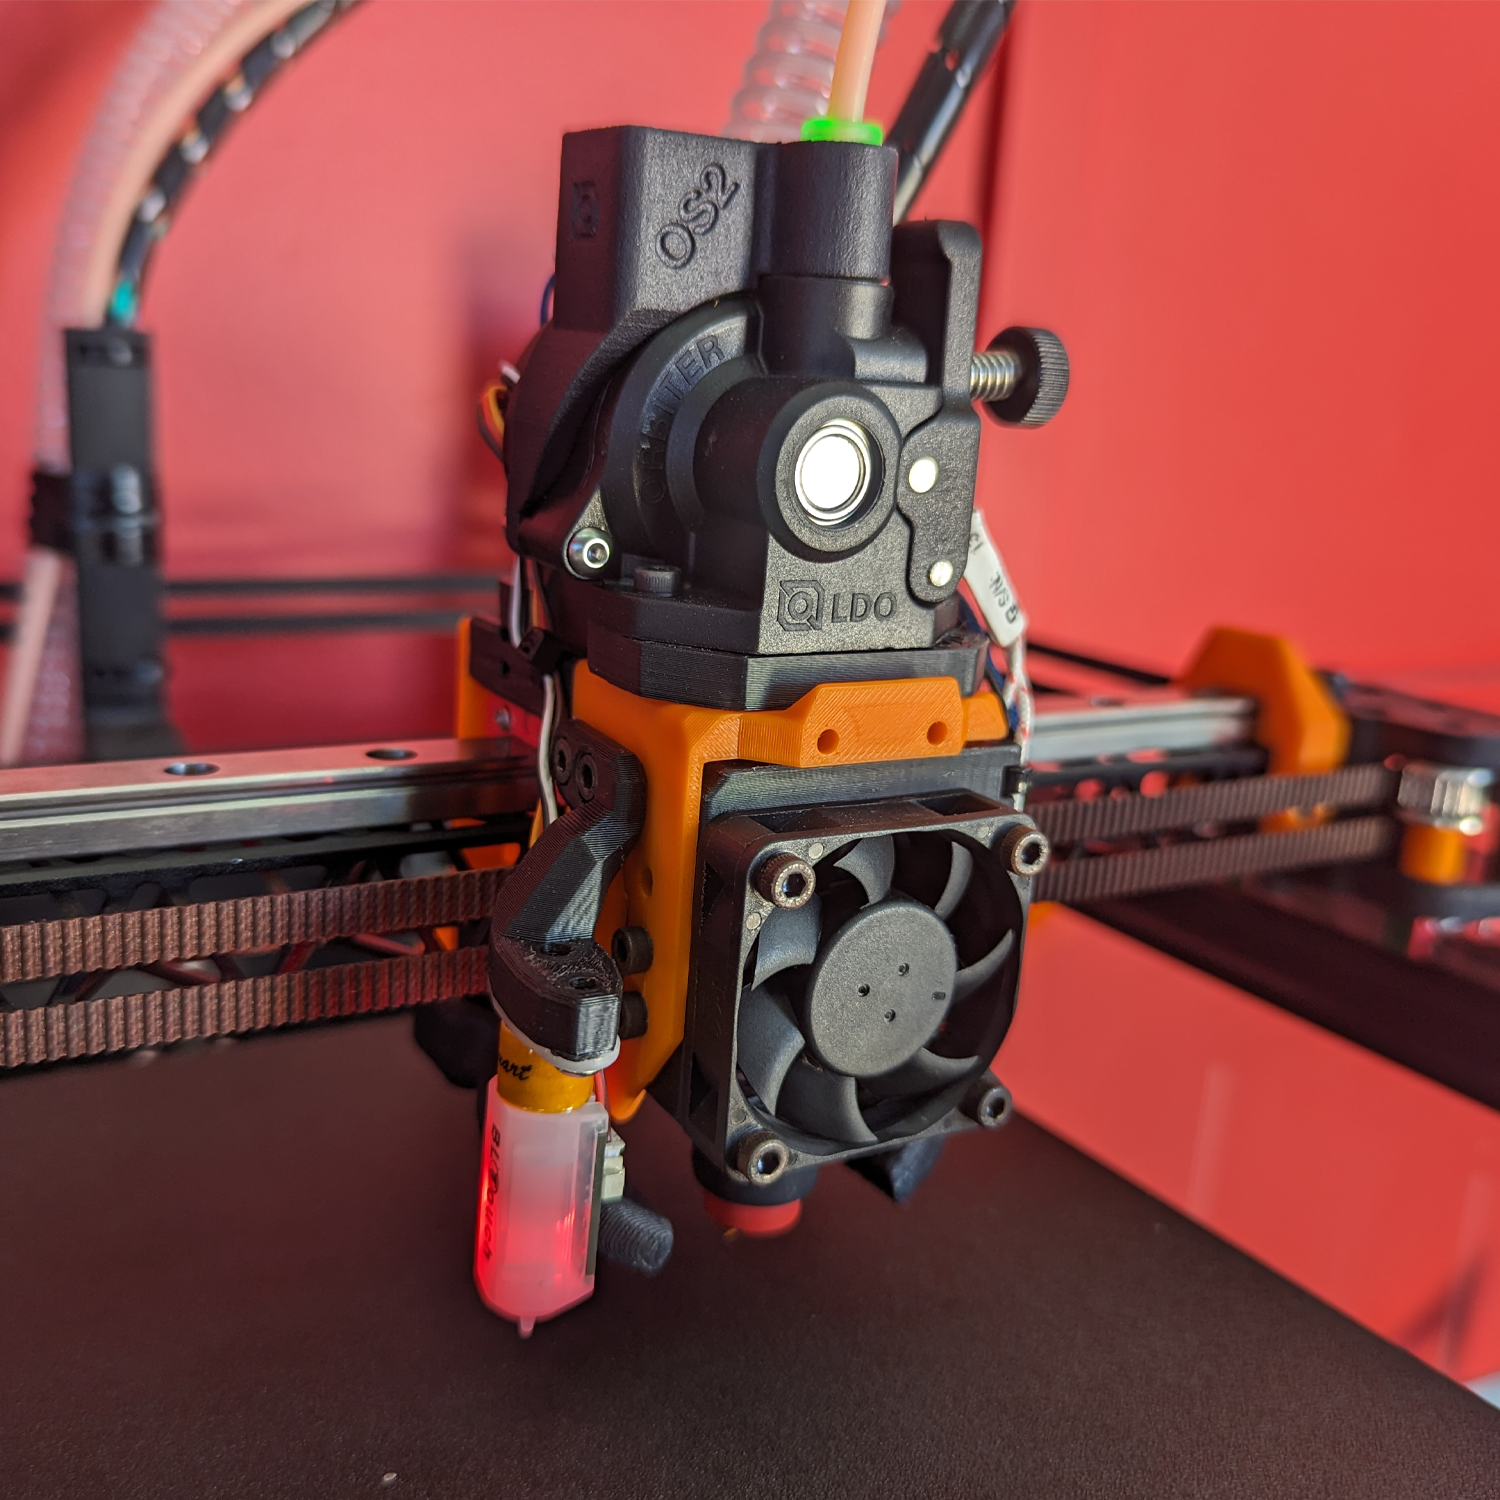 From Beginner to Expert - 4 Levels of Difficulty for Modifying Your 3D Printer